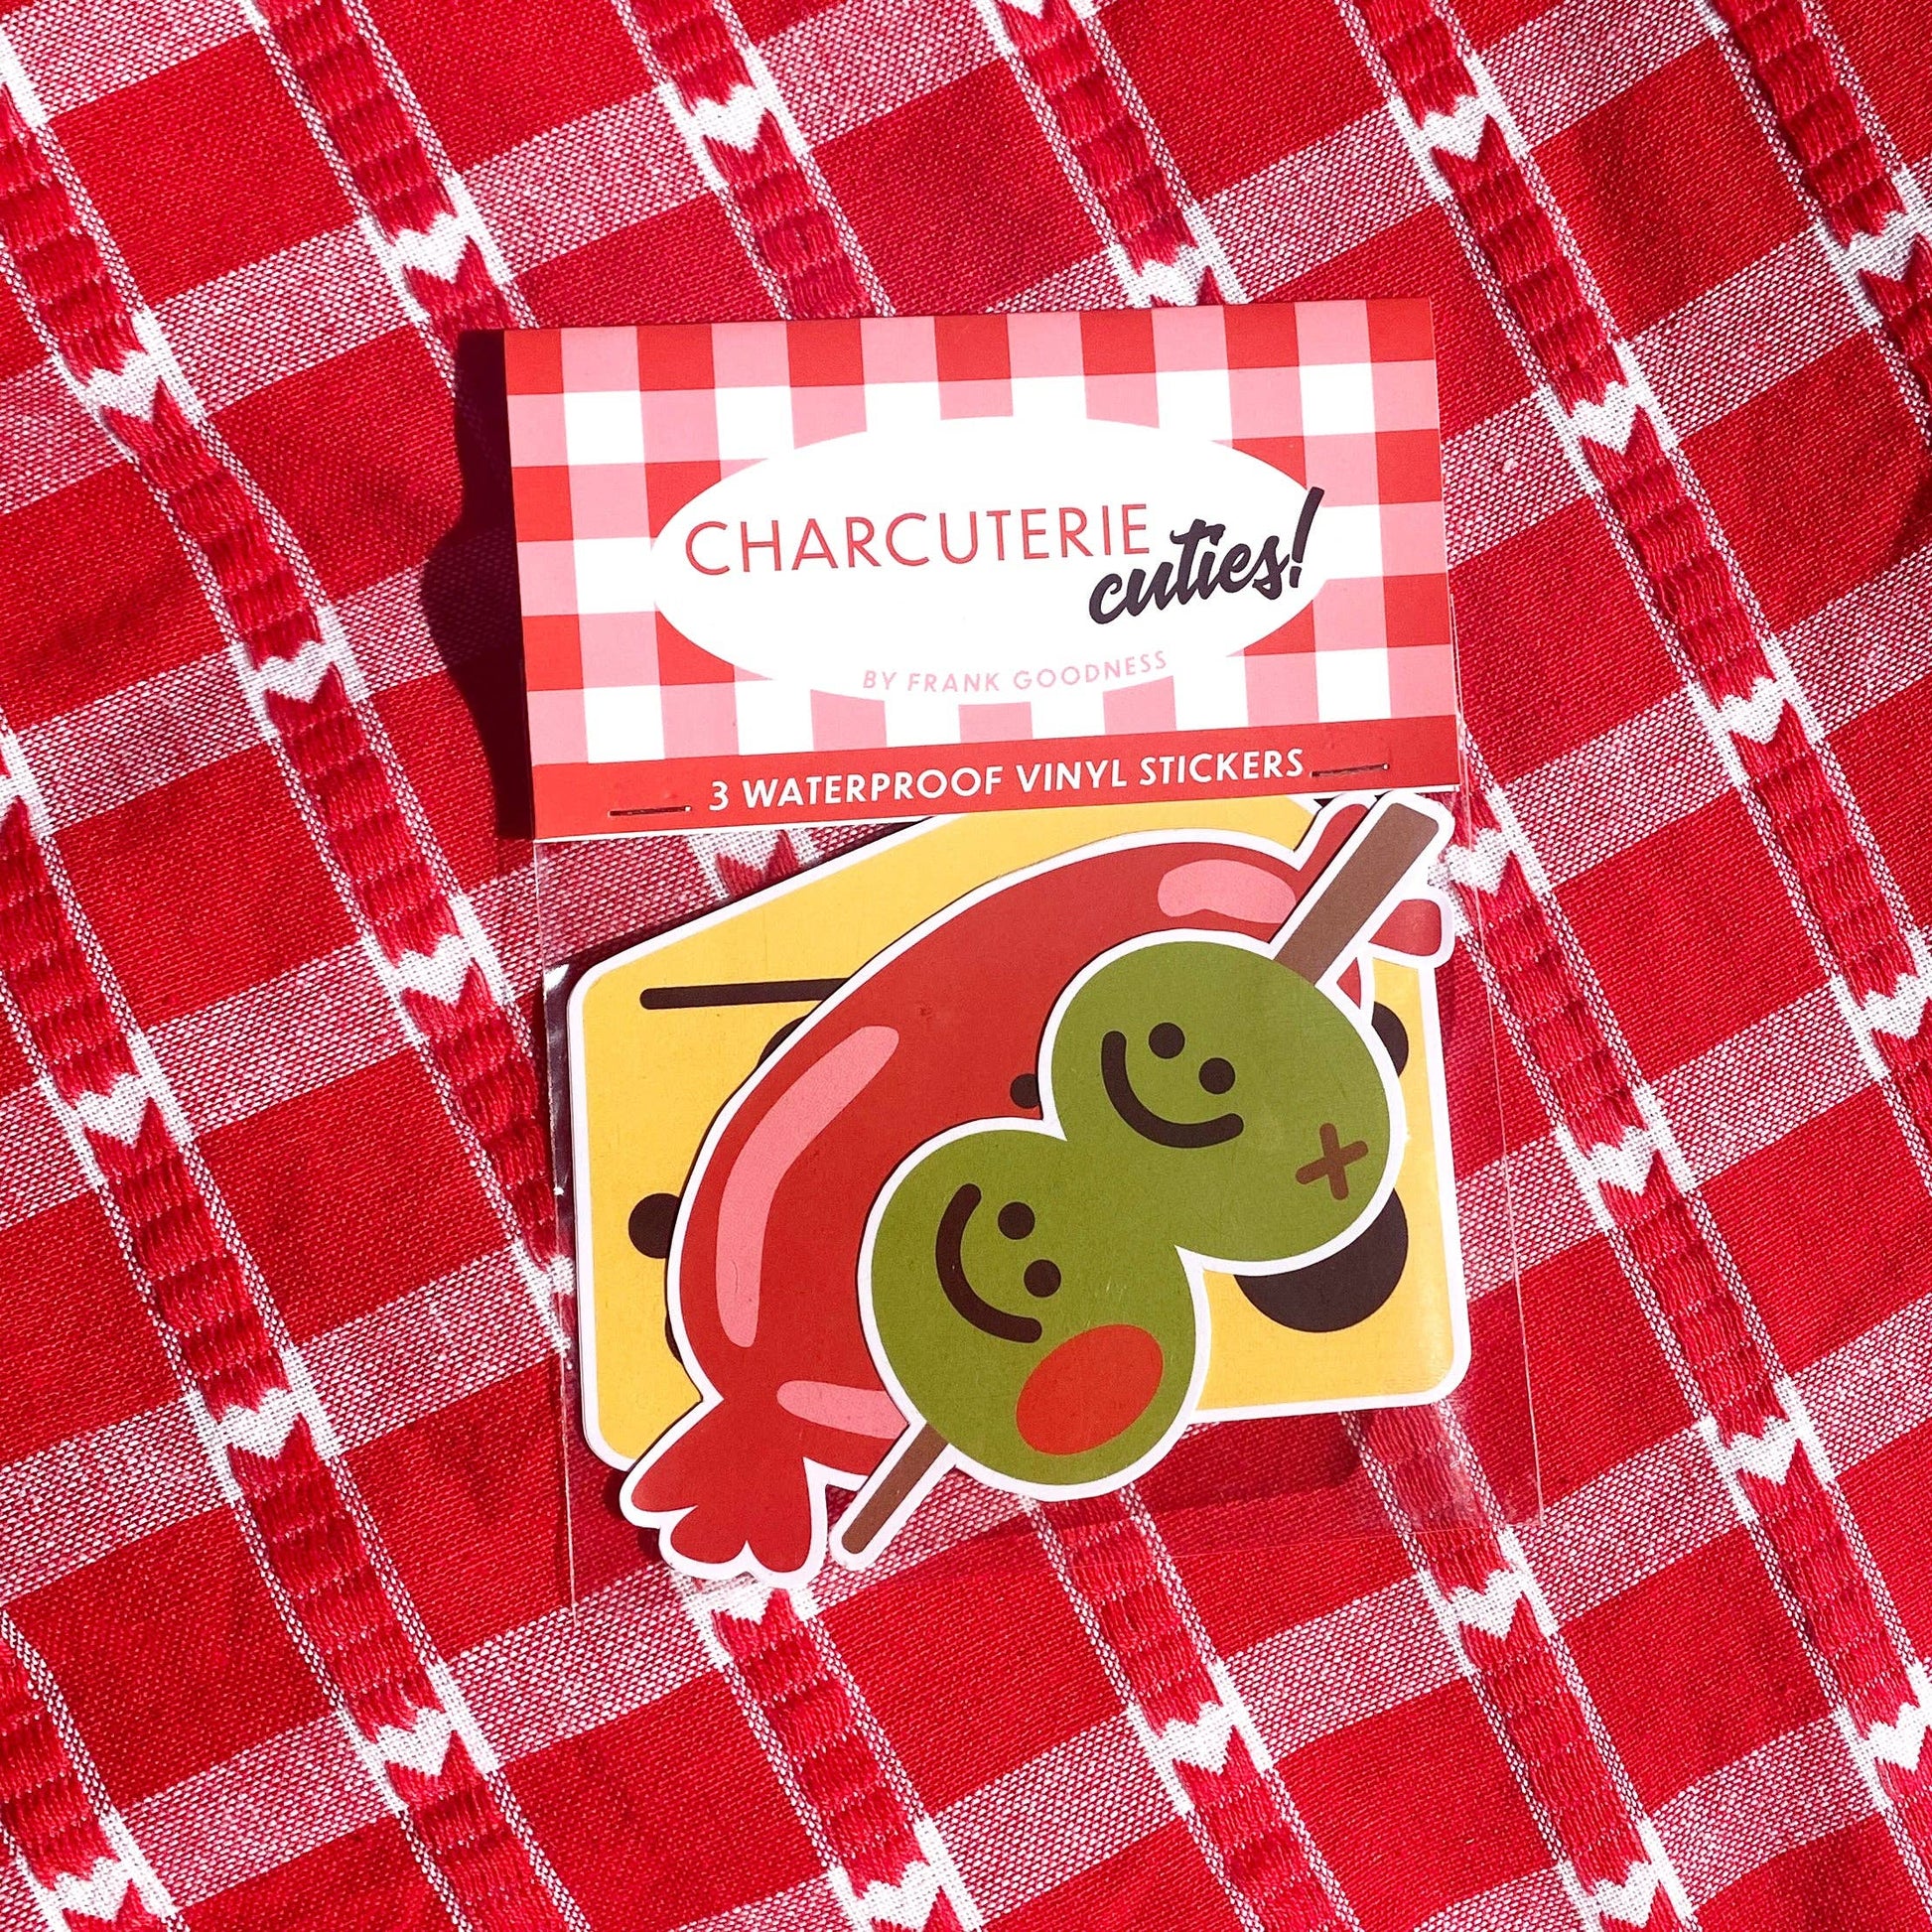 Charcuterie Cuties stickers in a pack laying on top of a table cloth.